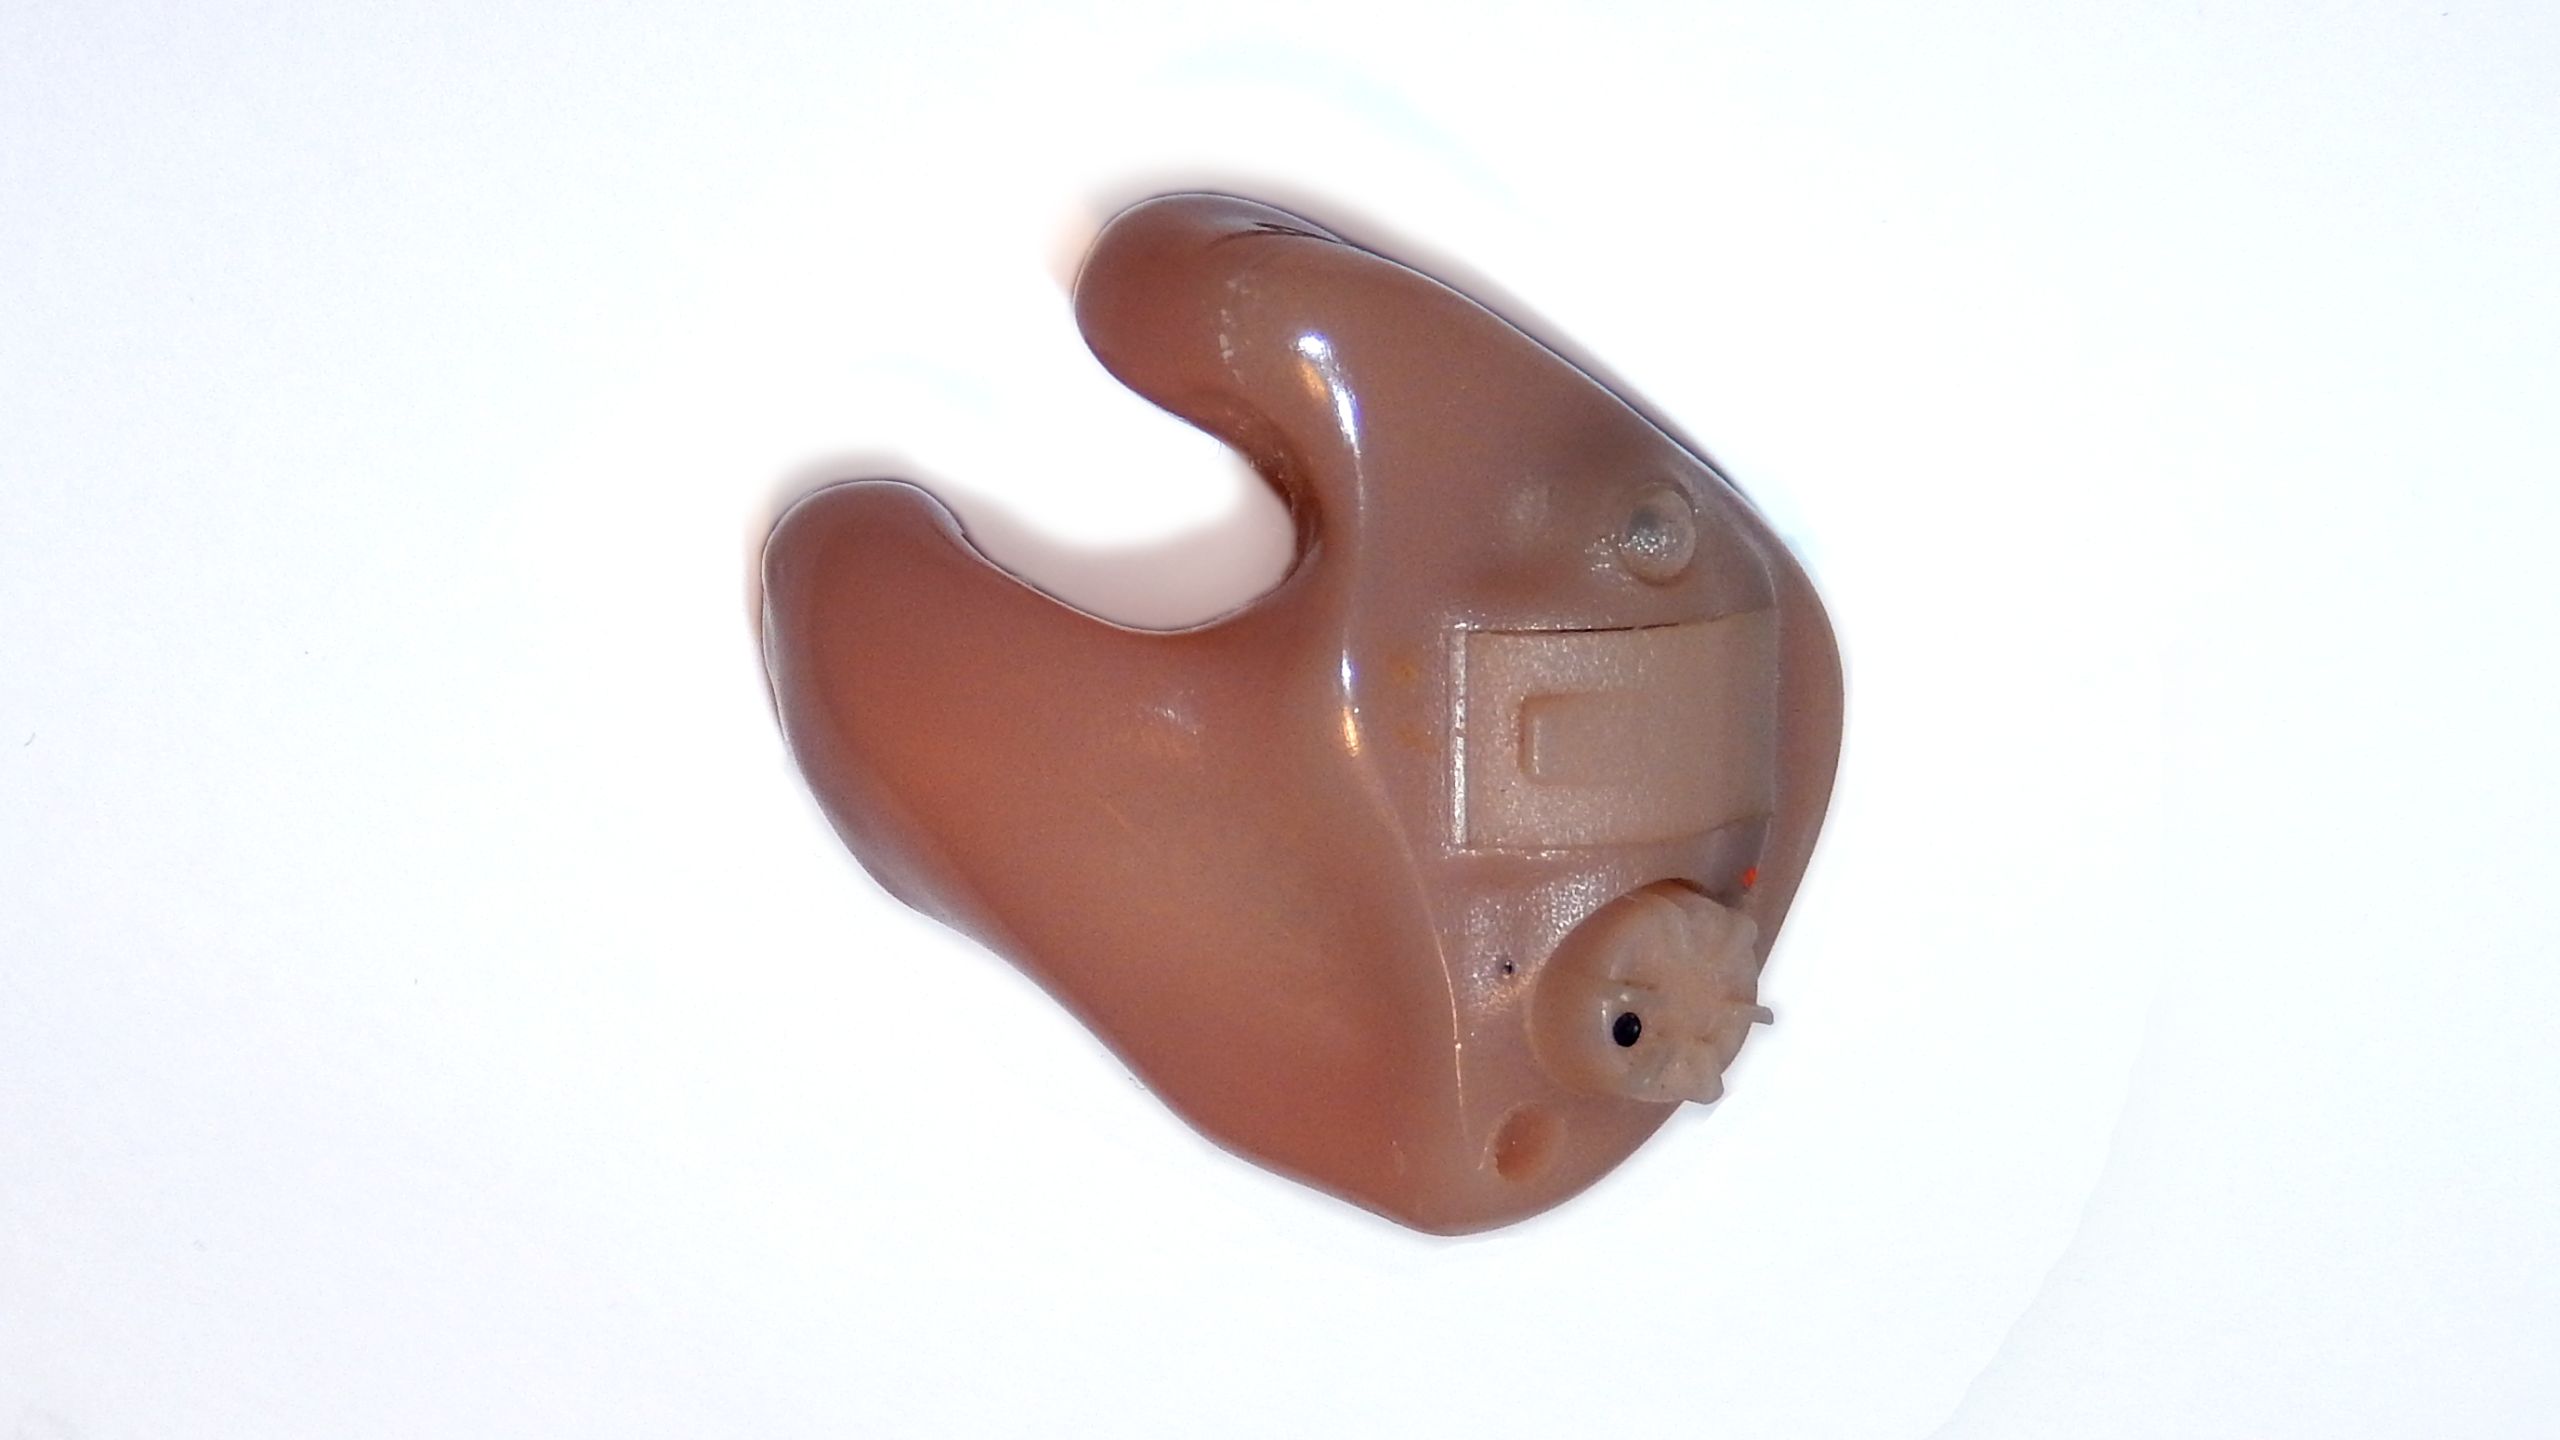 An in-the-ear hearing aid with a custom-fit earmold.